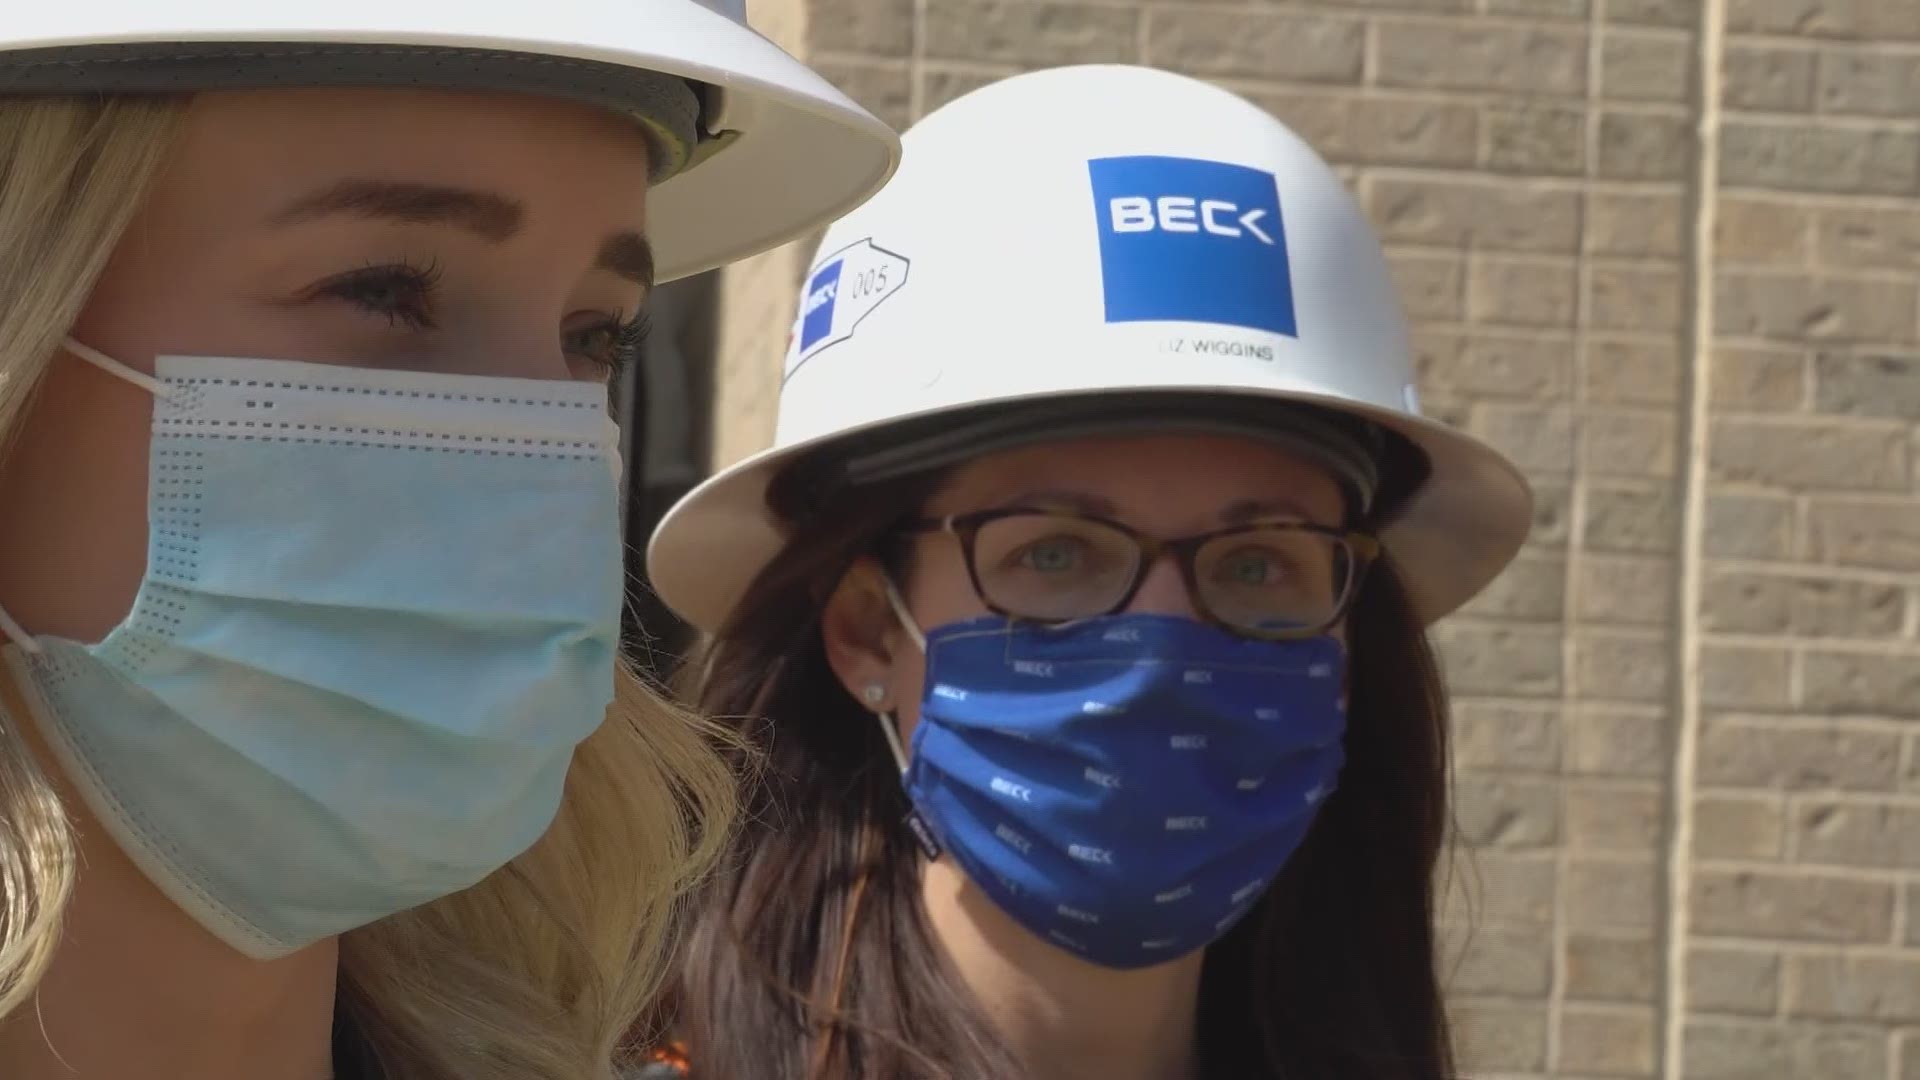 Construction is a male-dominated industry, but at Scottish Rite Hospital For Children in Dallas, the remodel project has 25 women on one construction team.